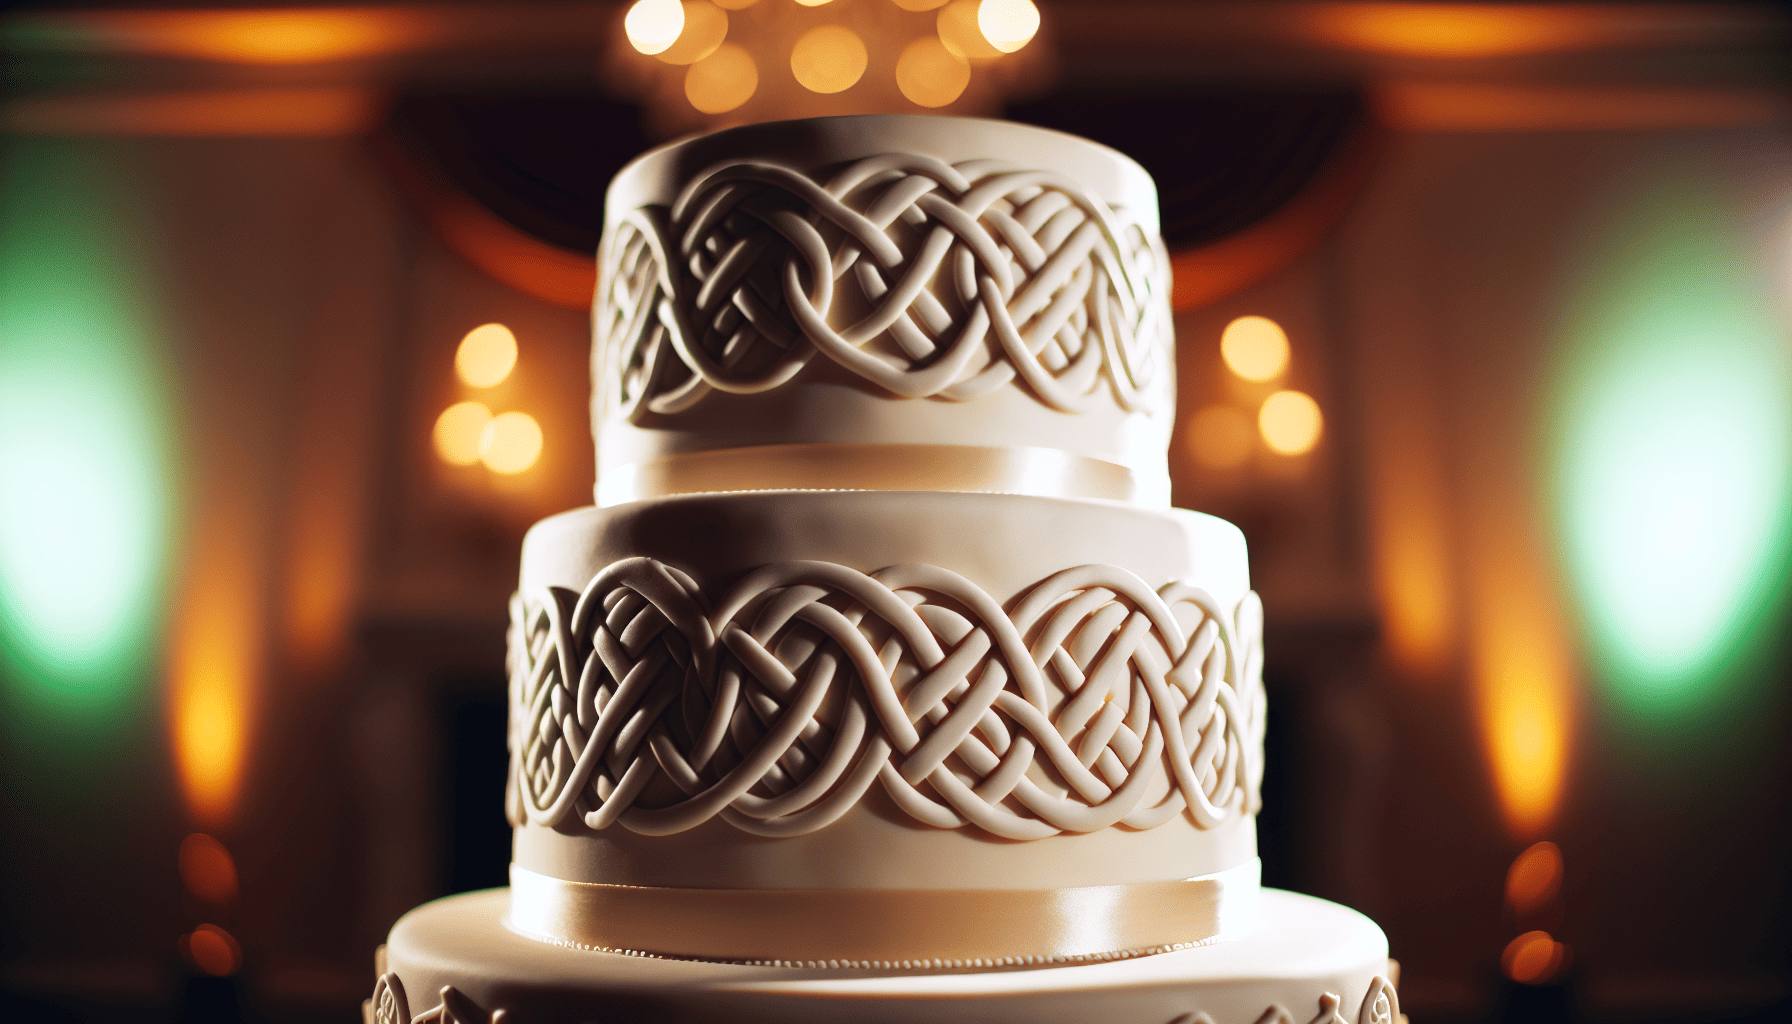 A beautifully decorated wedding cake with a Celtic knot design